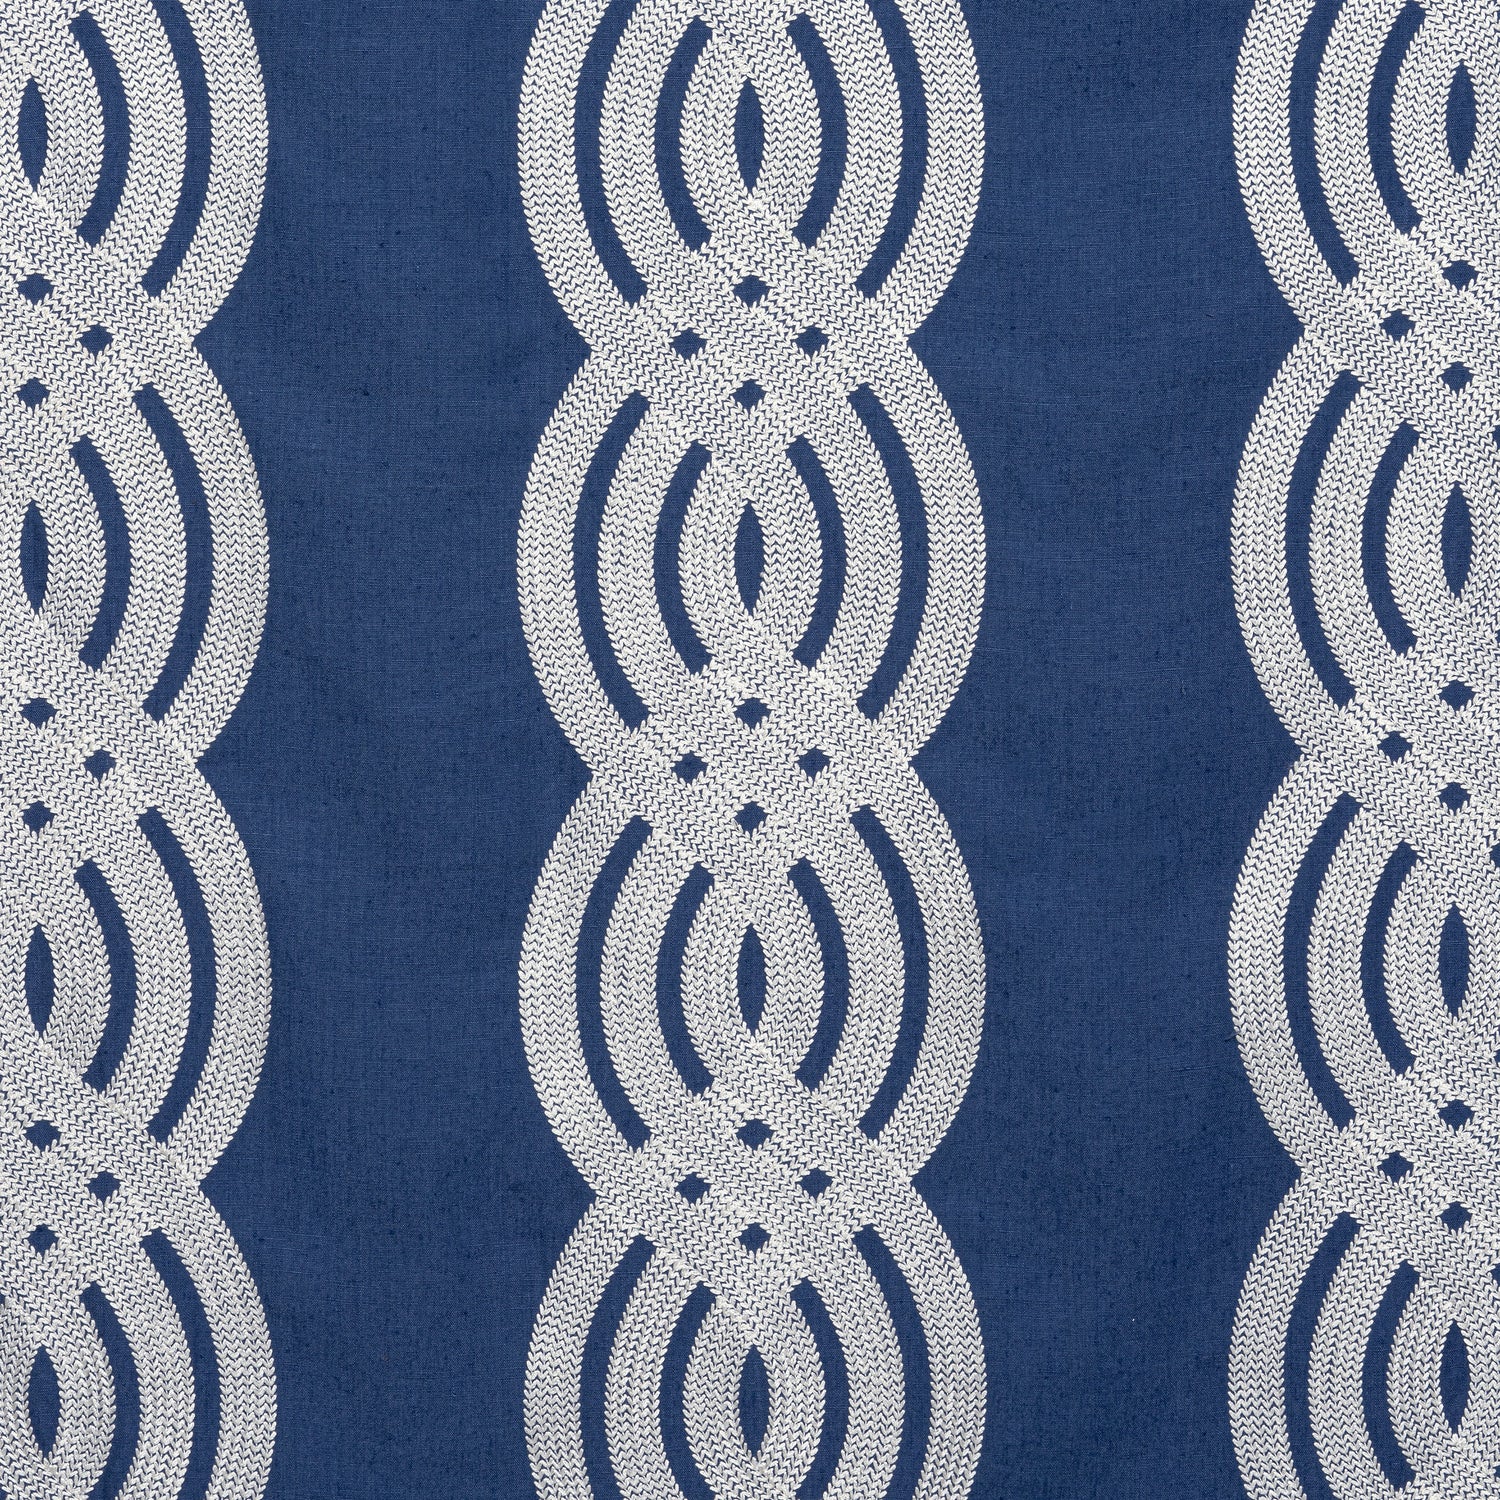 Braid Embroidery fabric in navy color - pattern number W710802 - by Thibaut in the Heritage collection